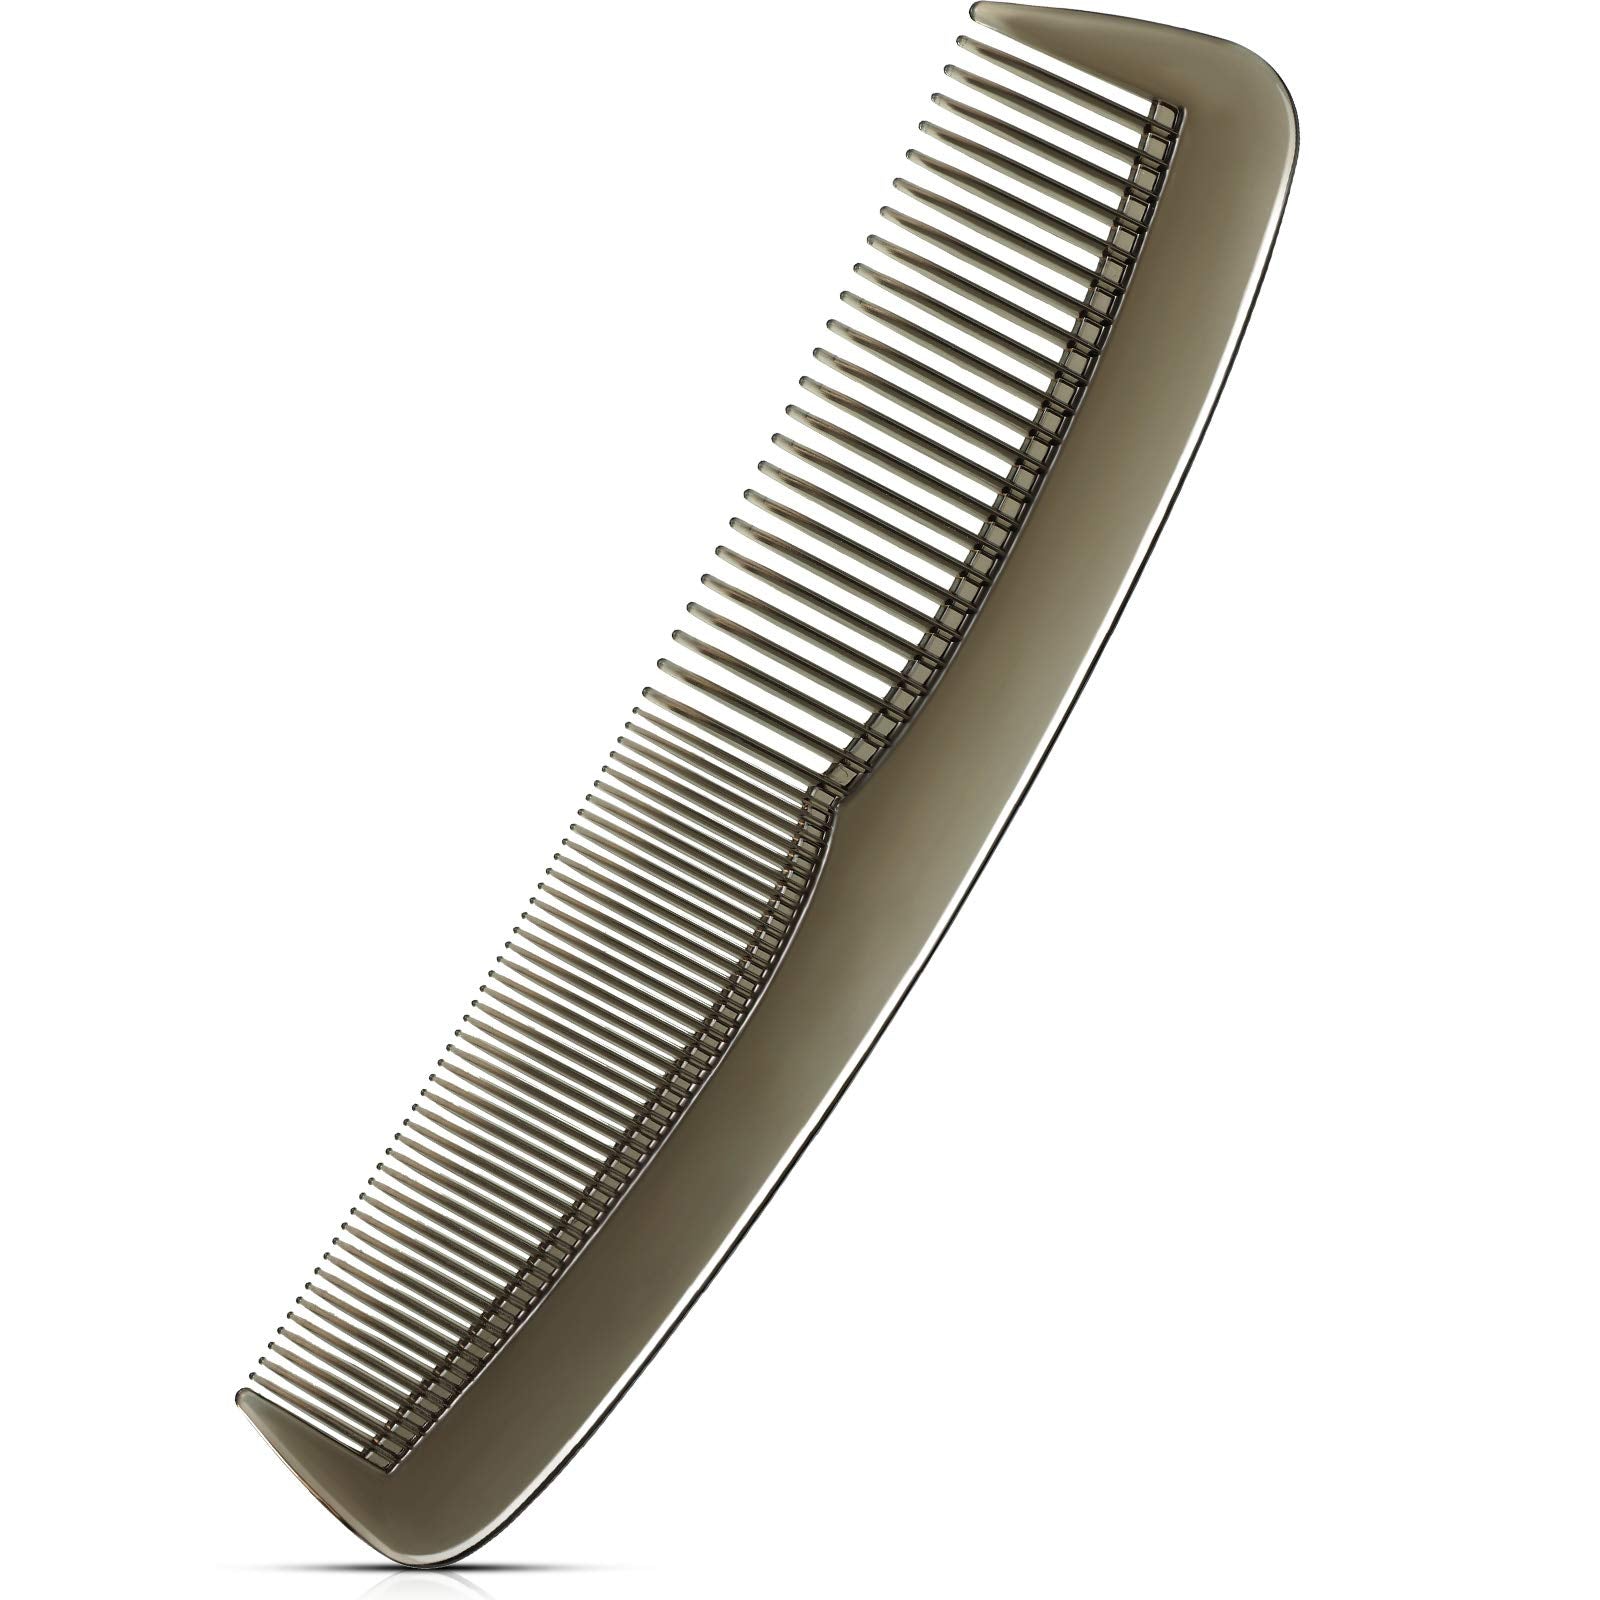 Hair Comb Cutting Comb Hairdressing Comb Fine Tooth Hair Comb Plastic Barber Comb with Standard and Fine Tooth, Styling Combs for Men Women Home Salon Hair Styling Grooming